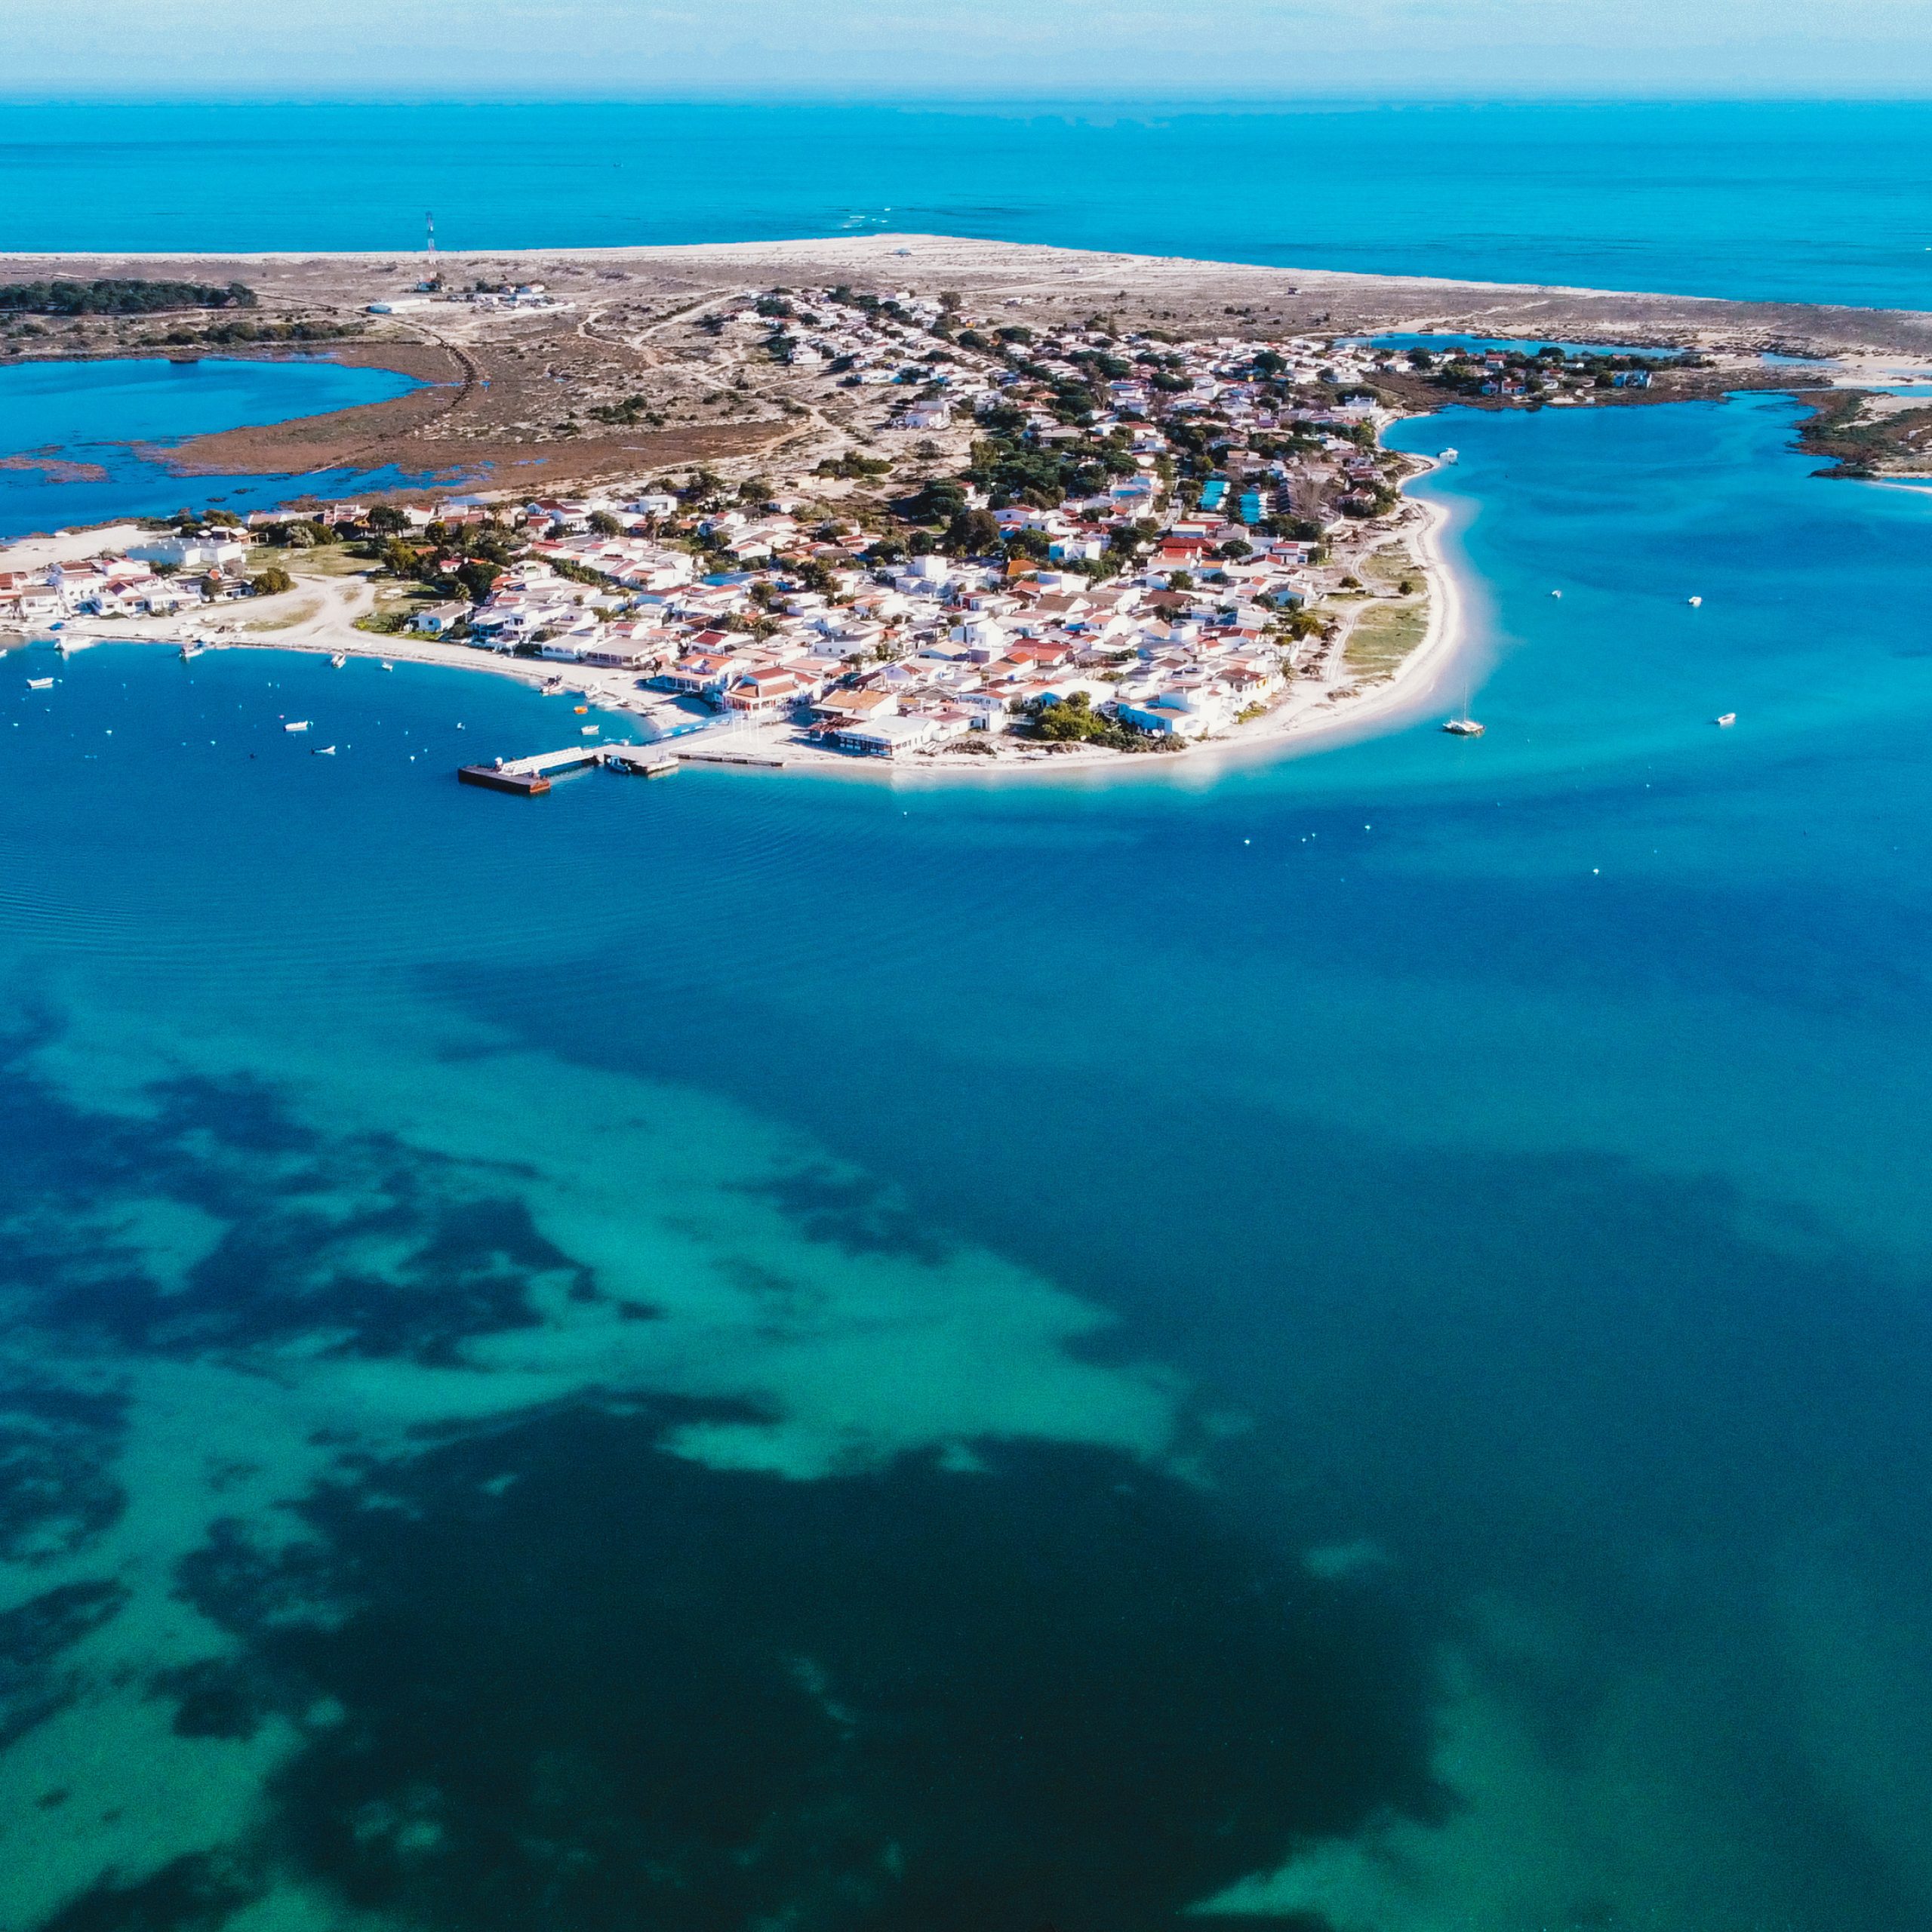 Island Boat Tour in Ria Formosa from Olhao